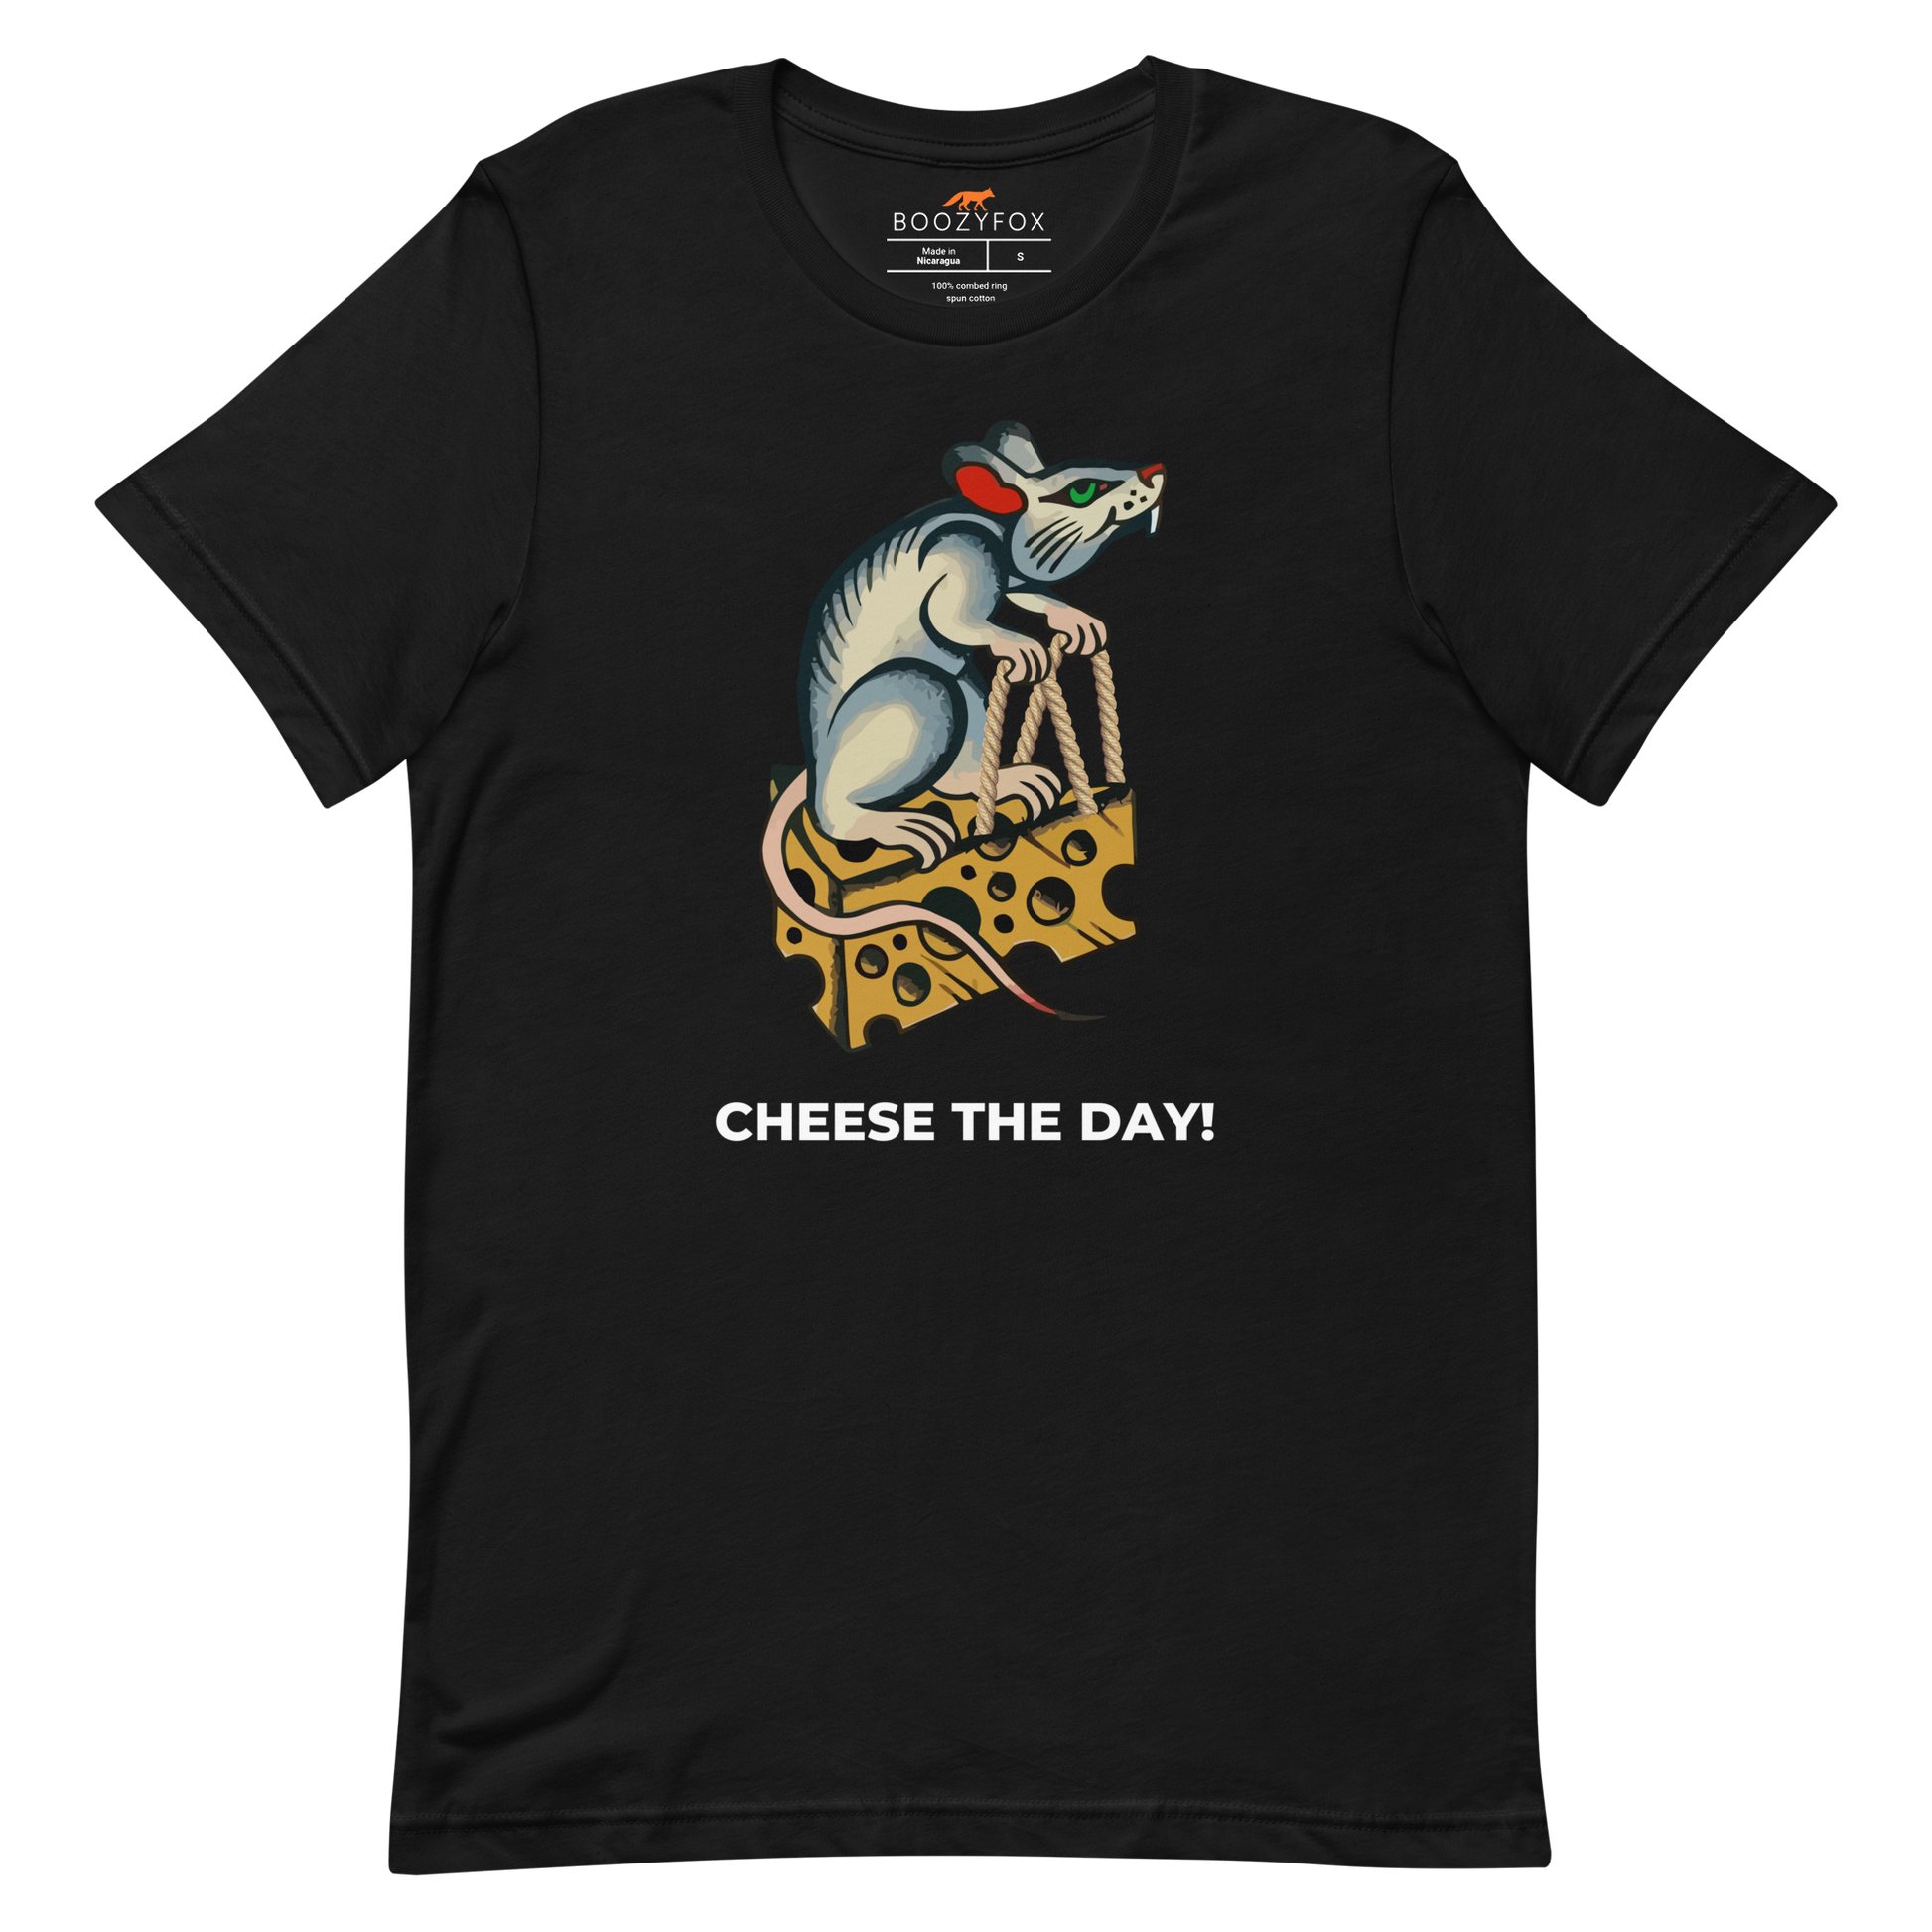 Black Premium Rat T-Shirt featuring a hilarious Cheese The Day graphic on the chest - Funny Graphic Rat Tees - Boozy Fox